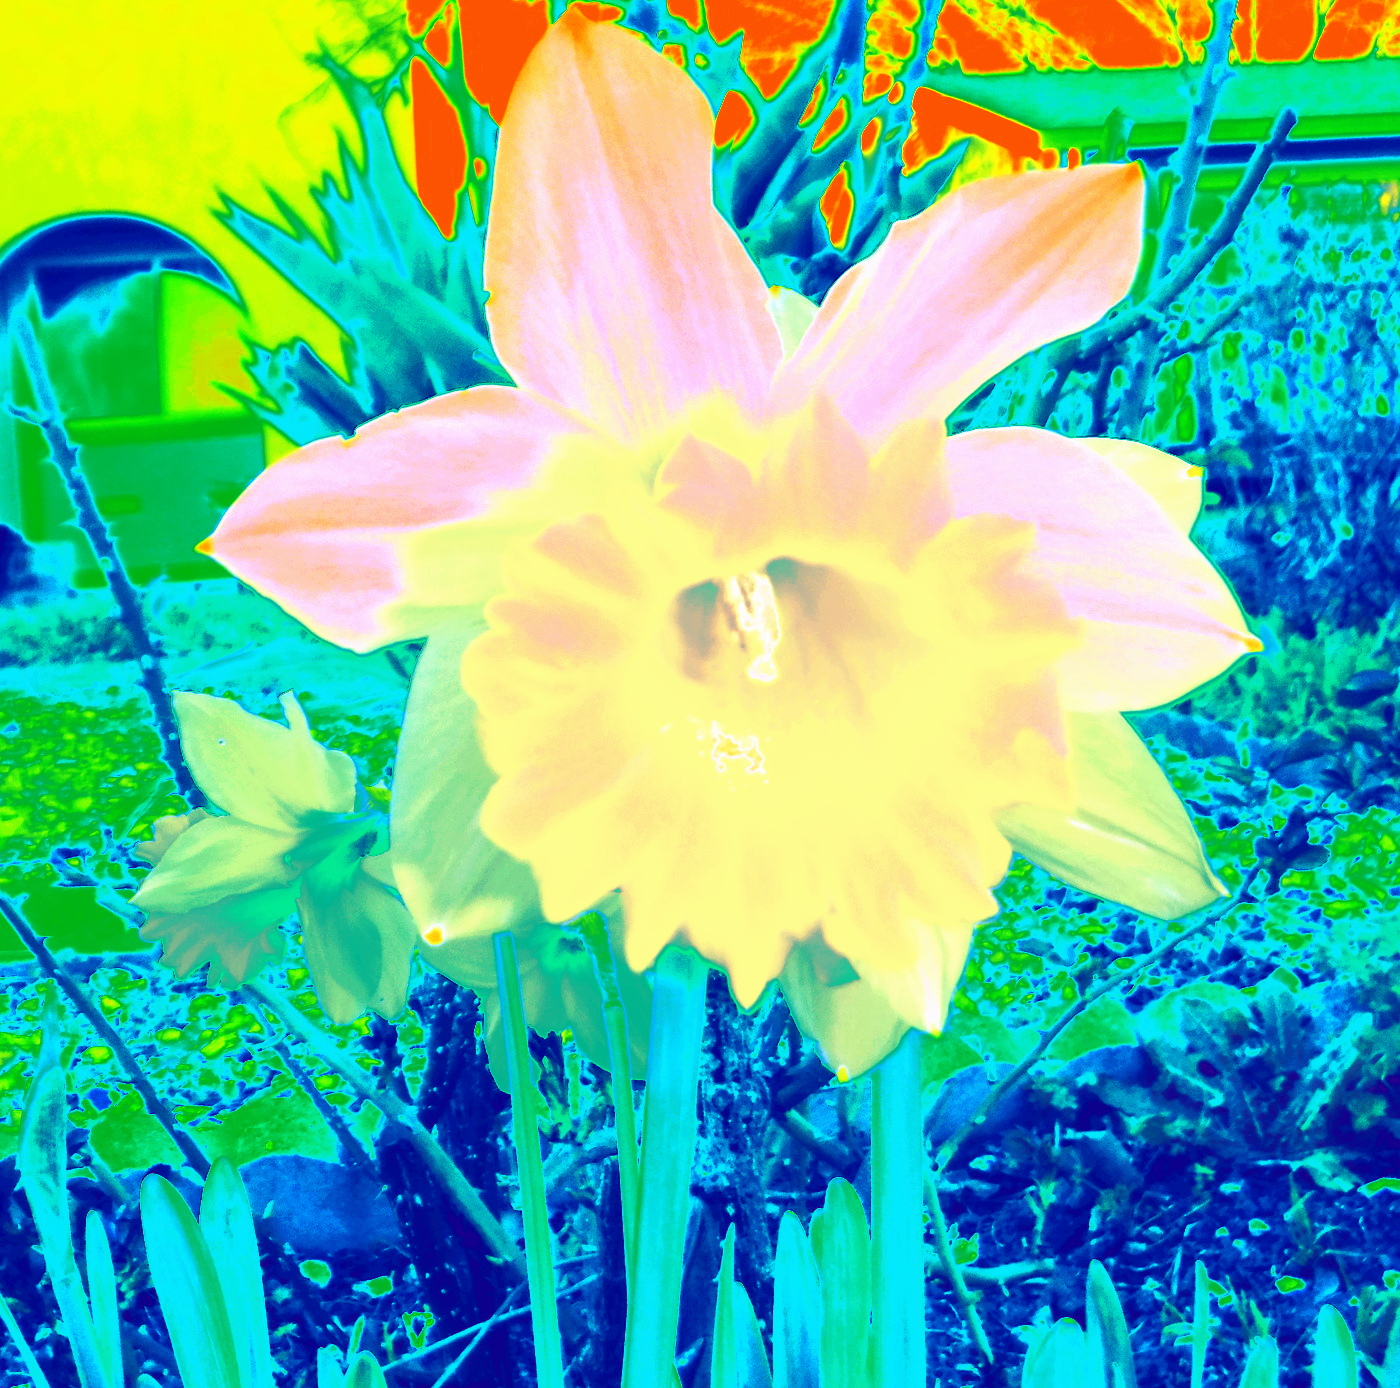 Photo taken by me with thermal effect on LunaPic.com